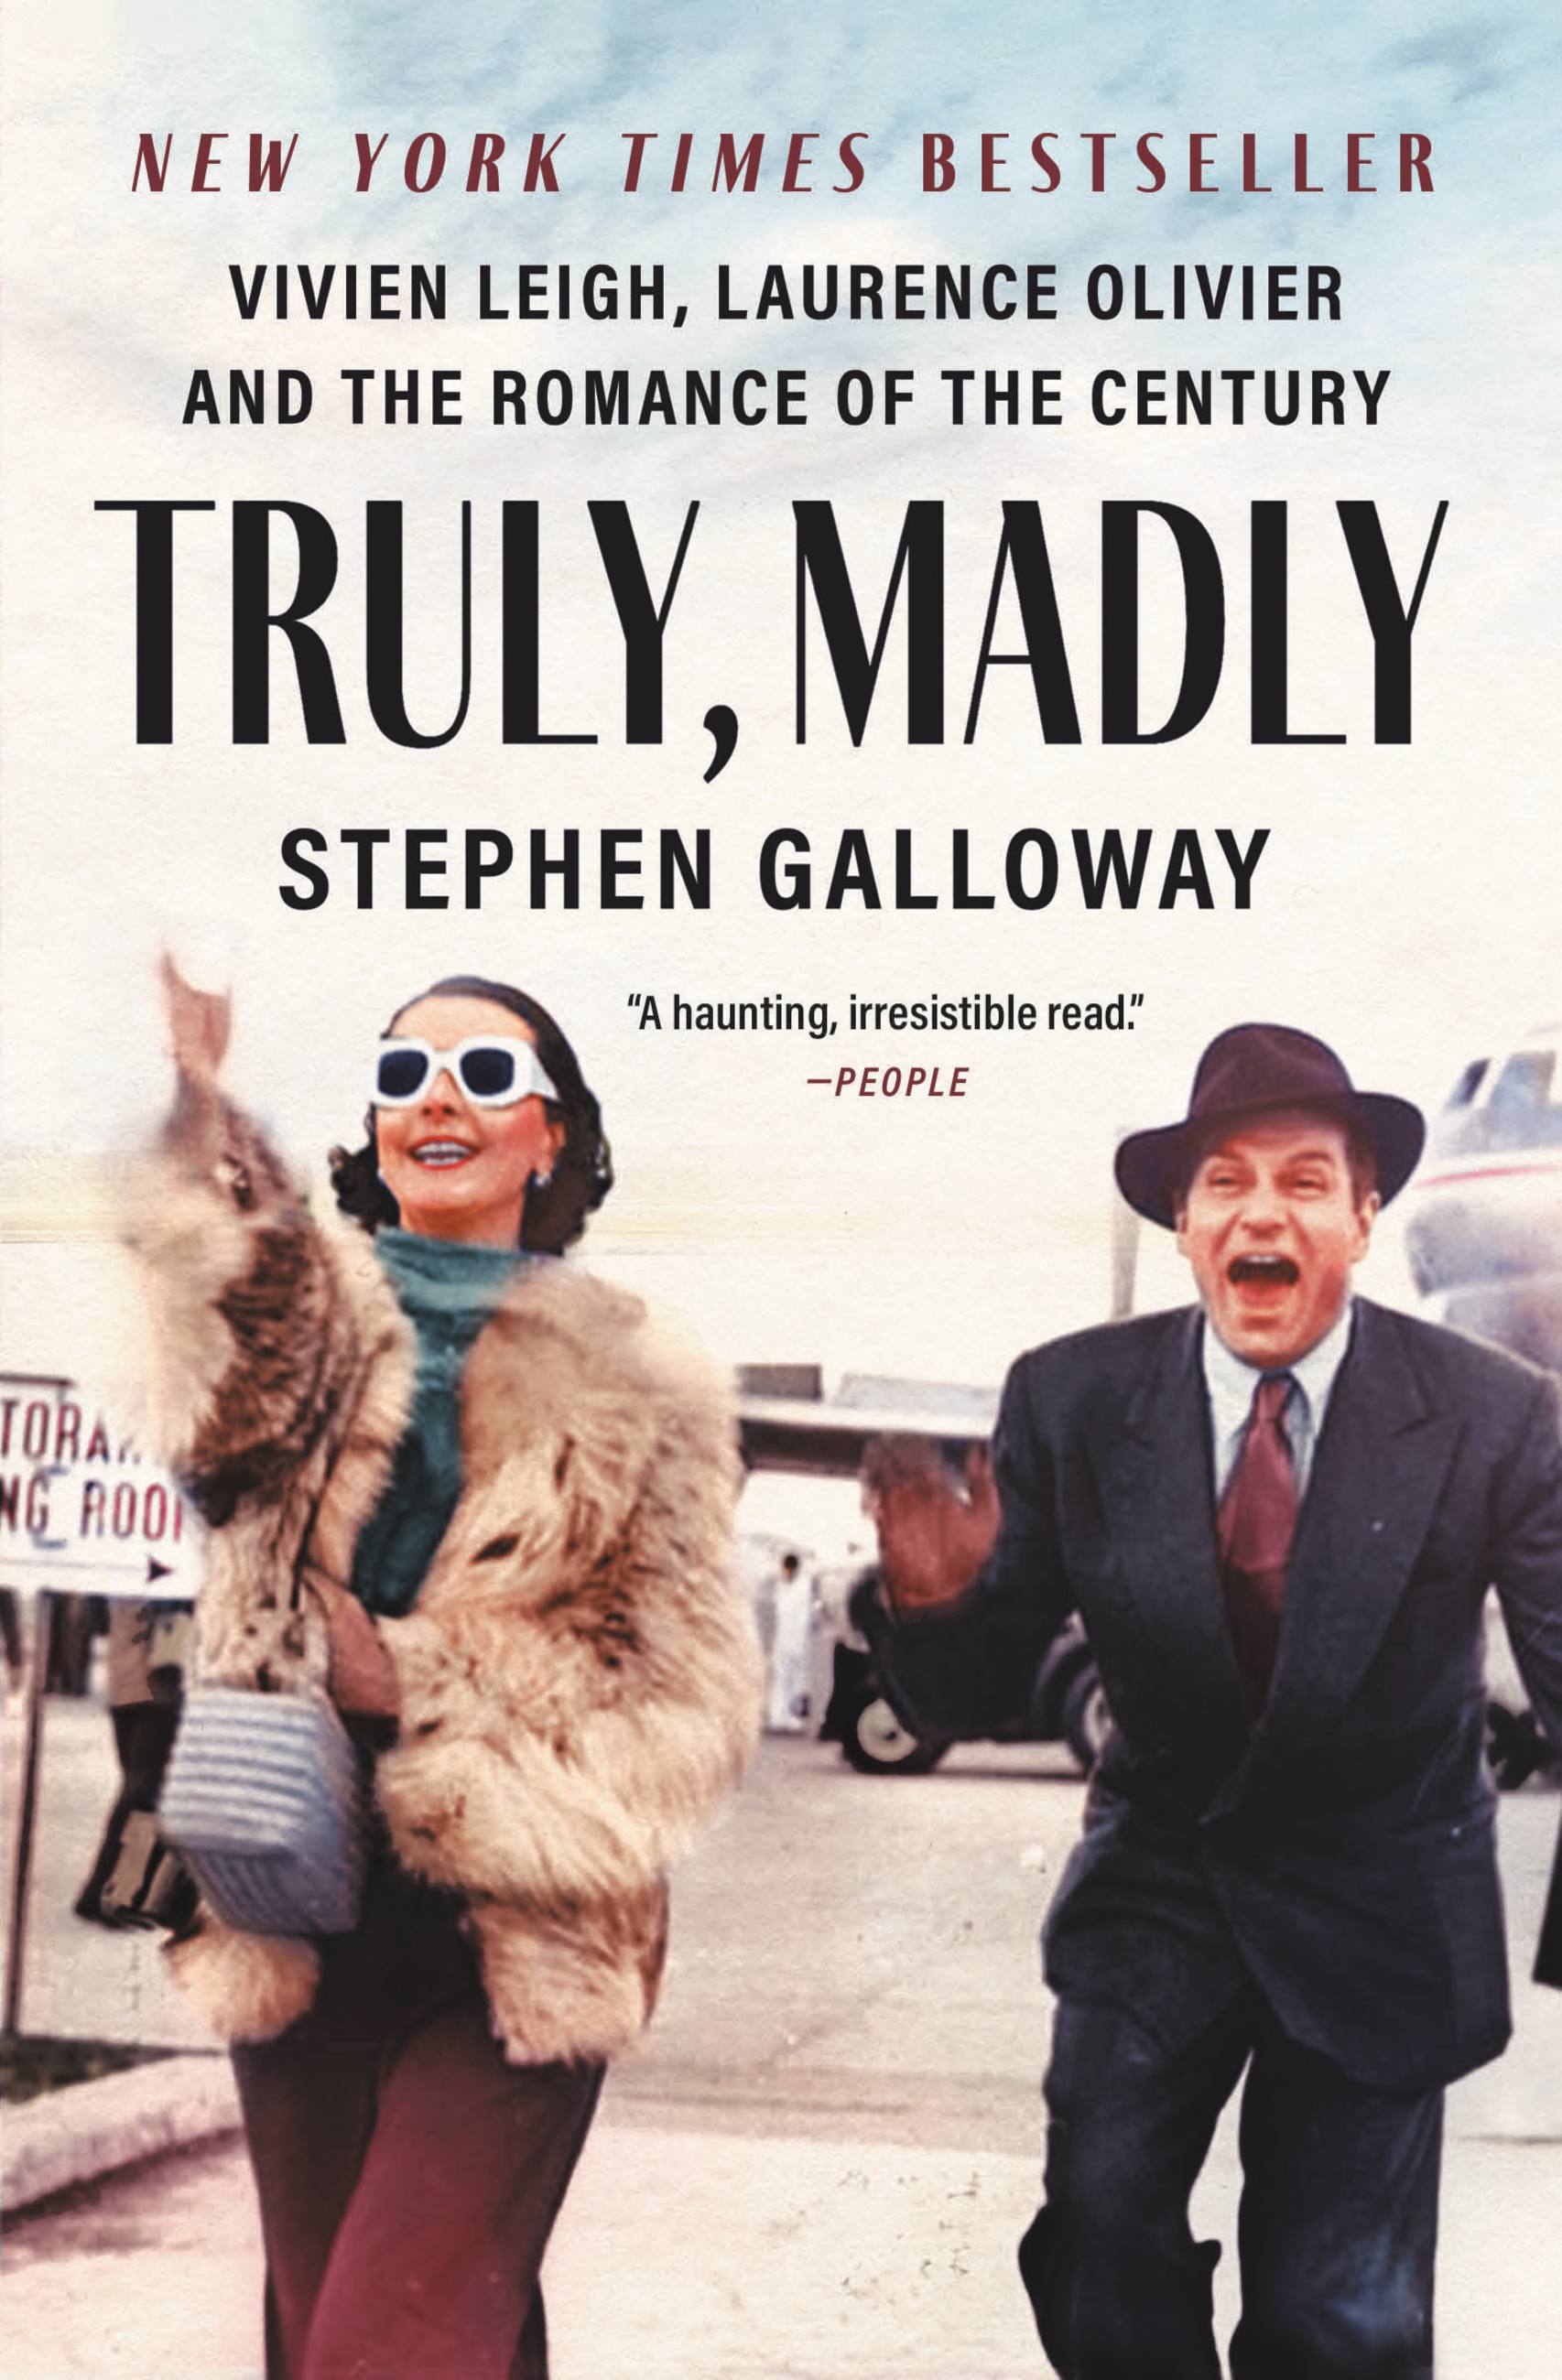 Truly, Madly by Stephen Galloway Hachette Book Group pic